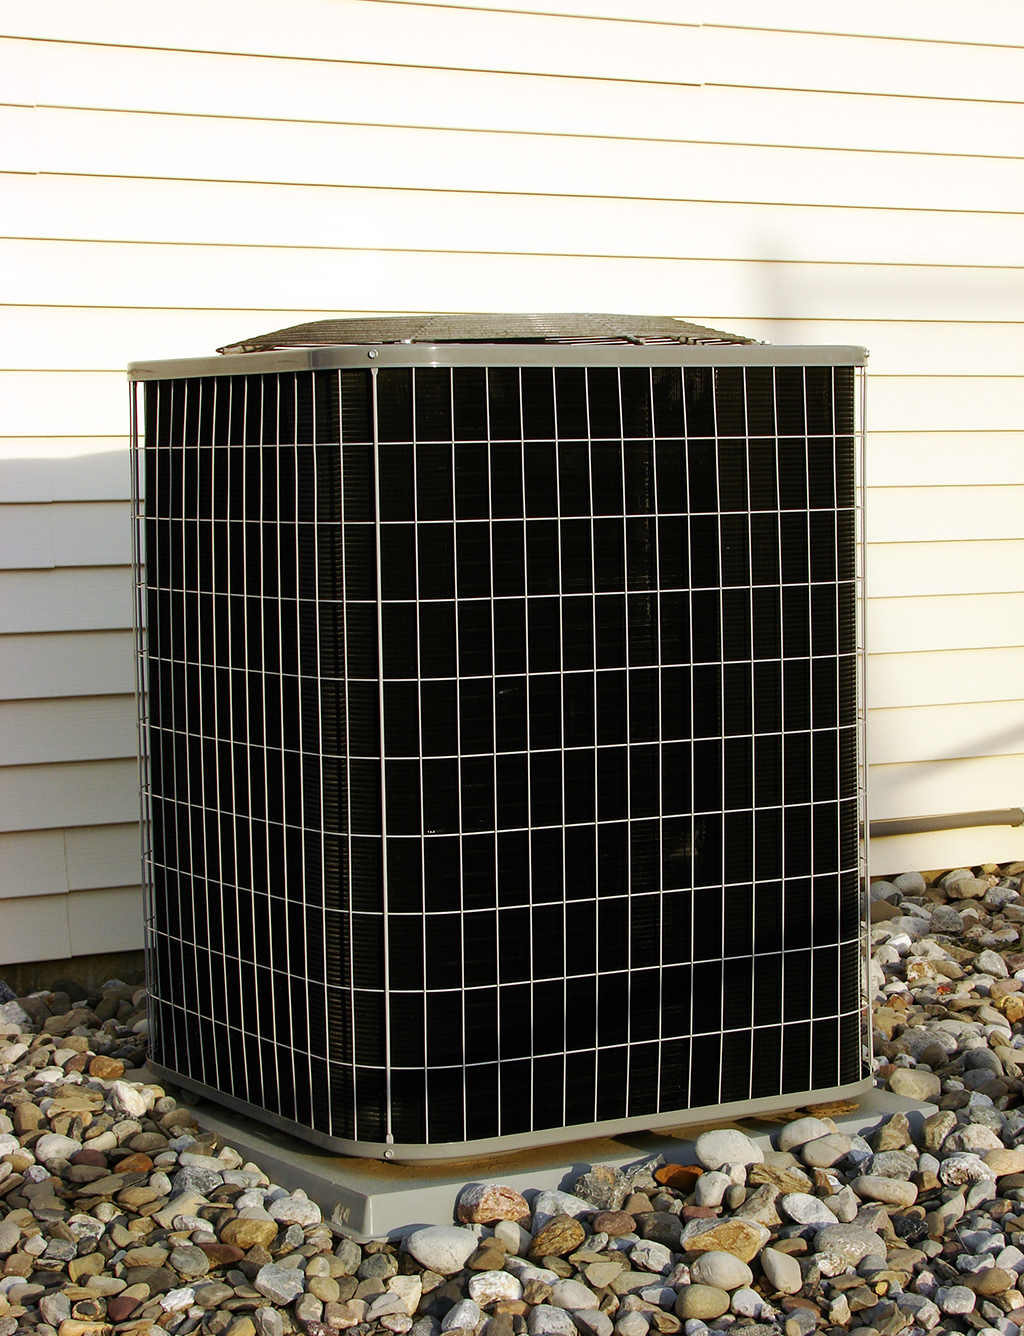 HVAC Issues That Require The Attention Of A Heating And AC Repair Company | Fort Worth TX